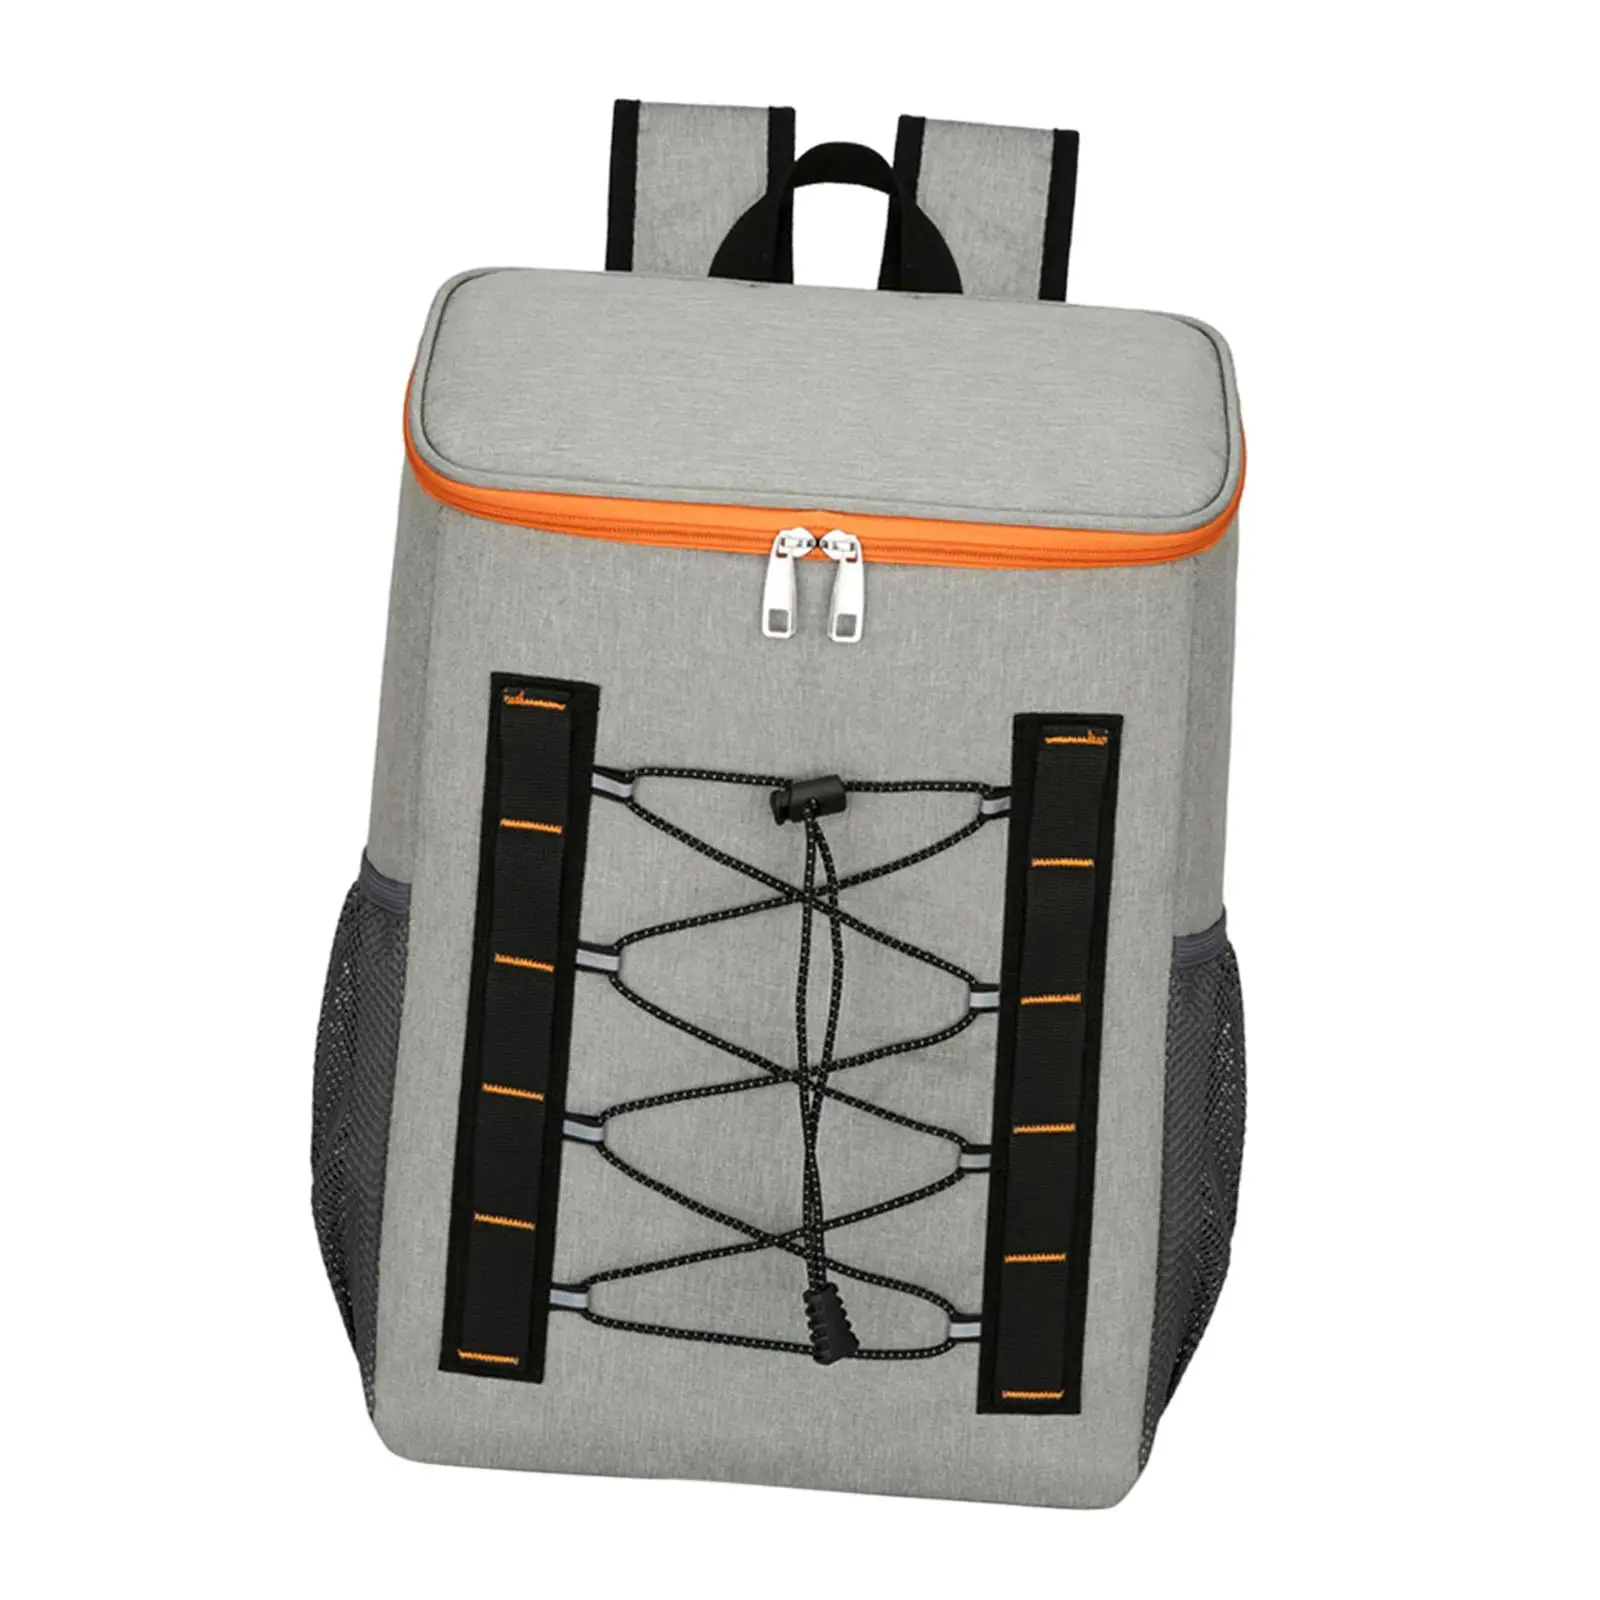 Outdoor Picnic Bag Thermal Bag Oxford Cloth Lightweight Lunch Backpack Cooler Bag for Camping Work Lunch Hiking Picnic Beach